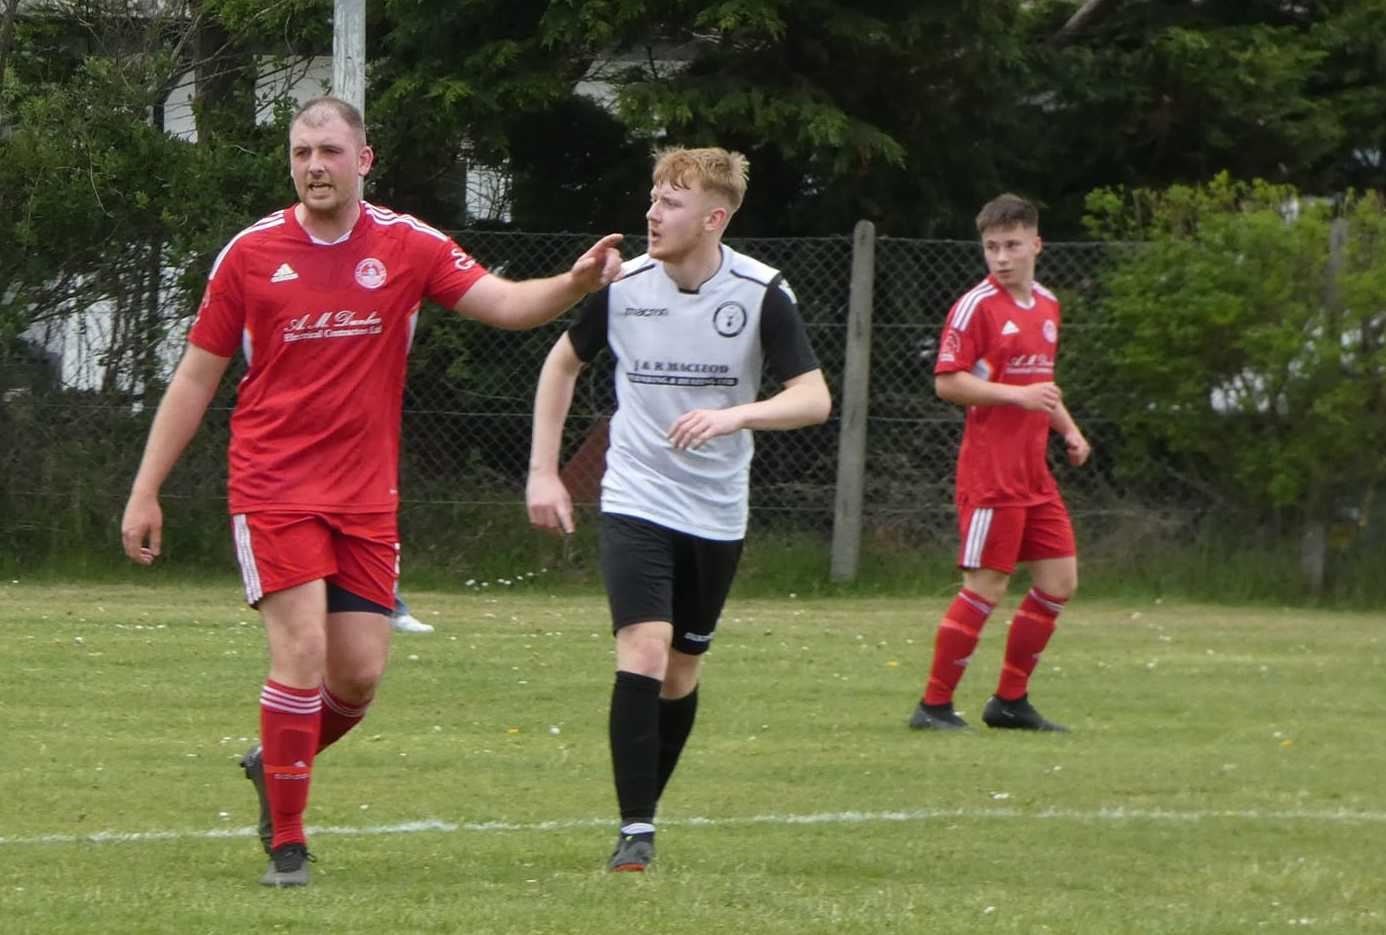 Robert Fisher (Brora Wanderers) and Ryan Ross (Social Club) in action.